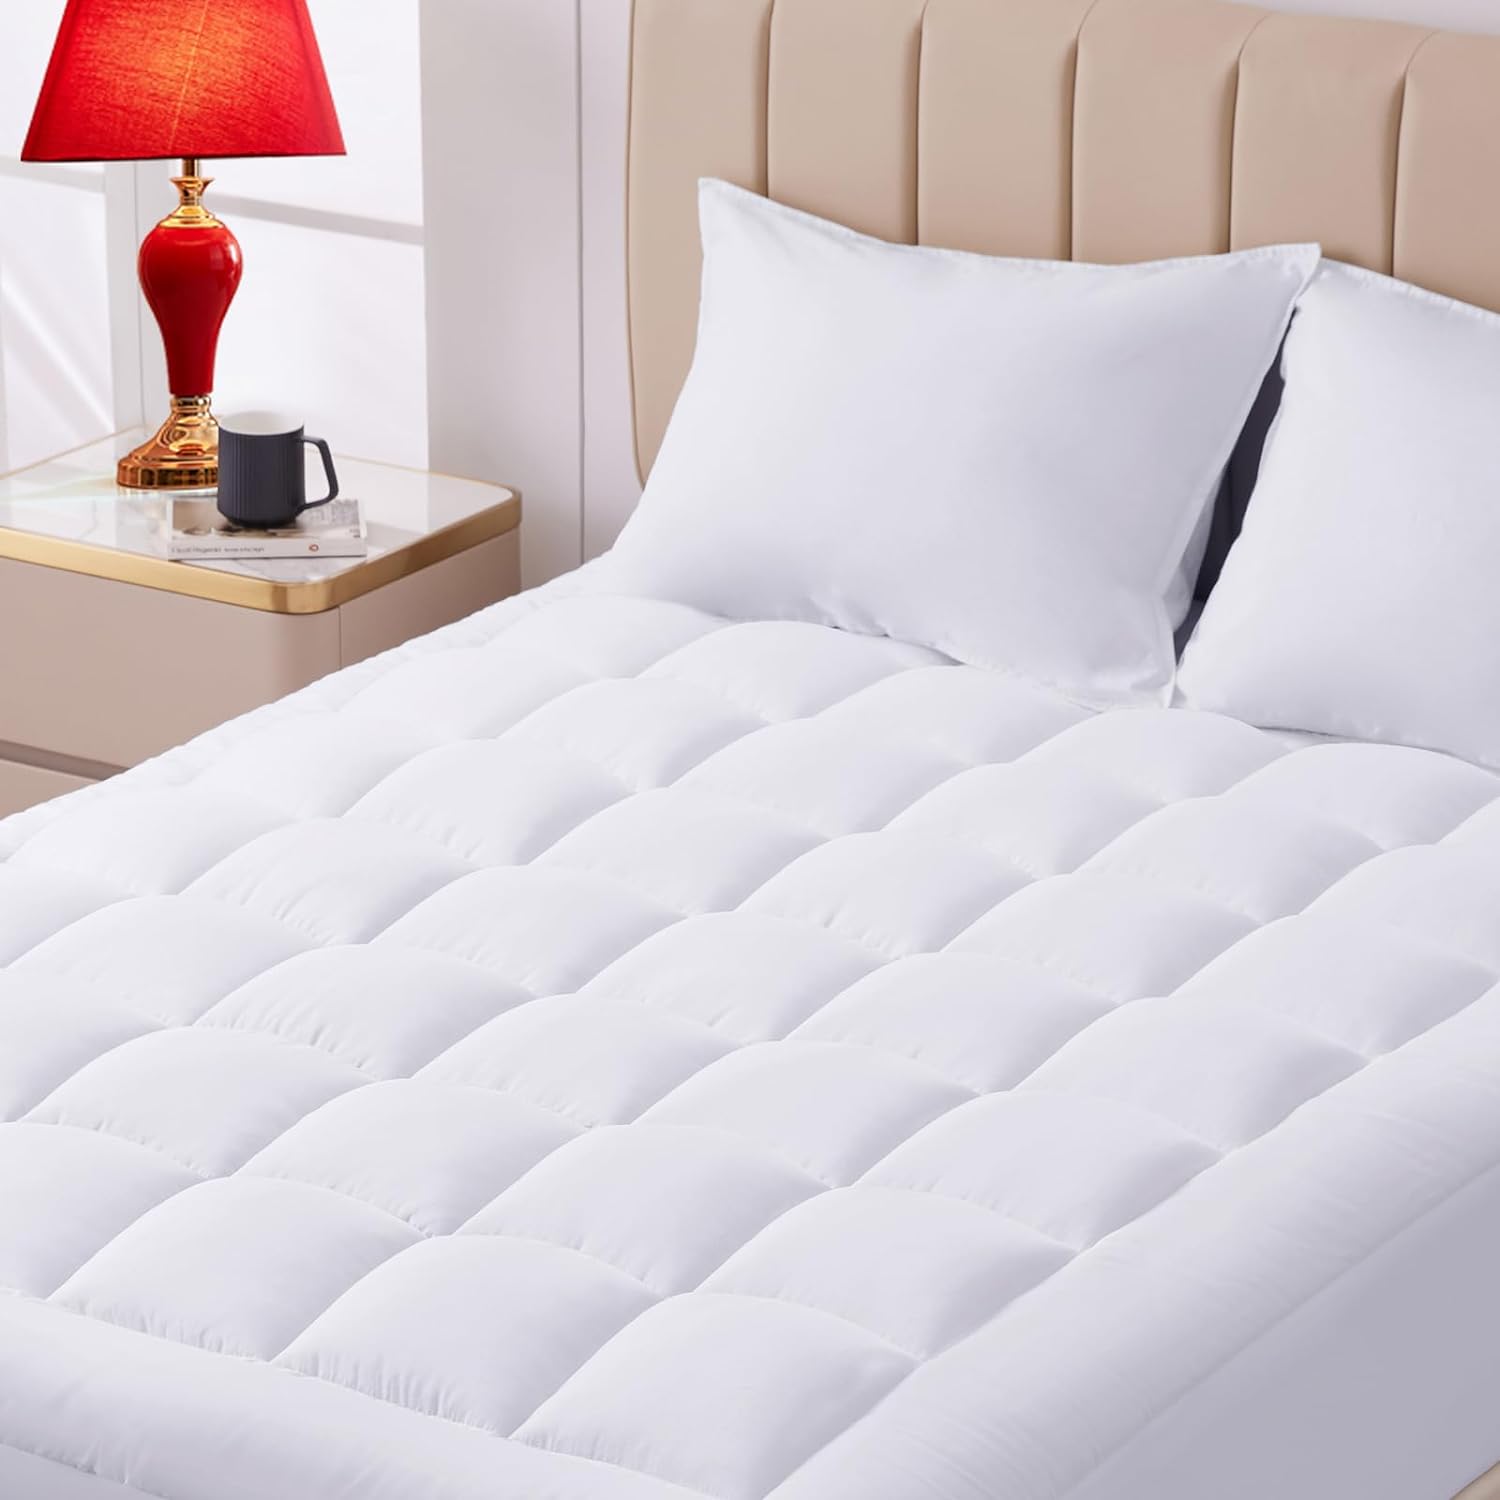 CozyLux Mattress Topper Queen Cotton Deep Pocket Mattress Cover Non Slip Breathable and Soft Quilted Fitted Mattress Topper Up to 18 Thick Pillowtop 450GSM Bed Mattress Pad White